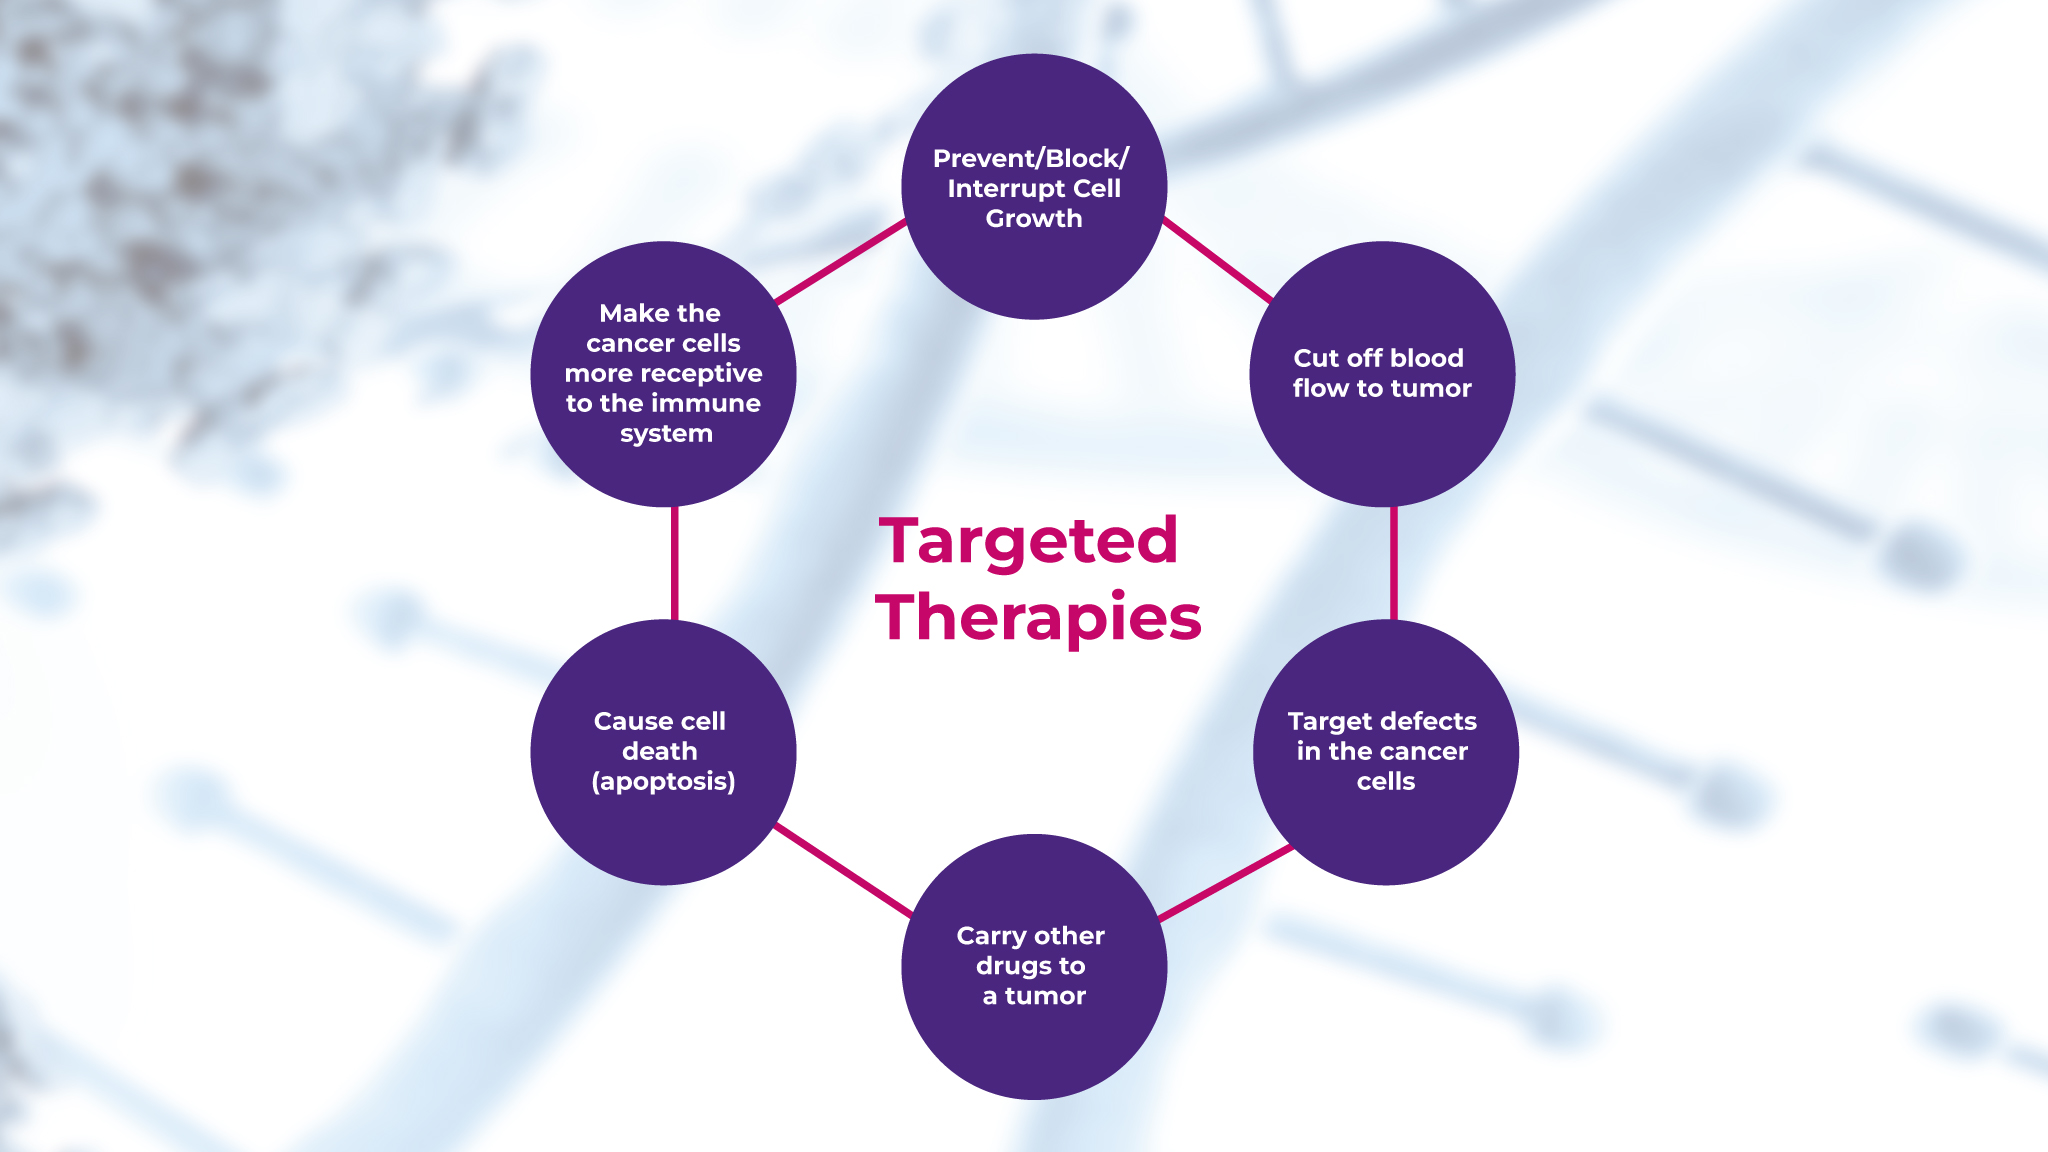 Figure 1. How targeted therapies are utilized in cancer treatment to slow the growth of tumors.